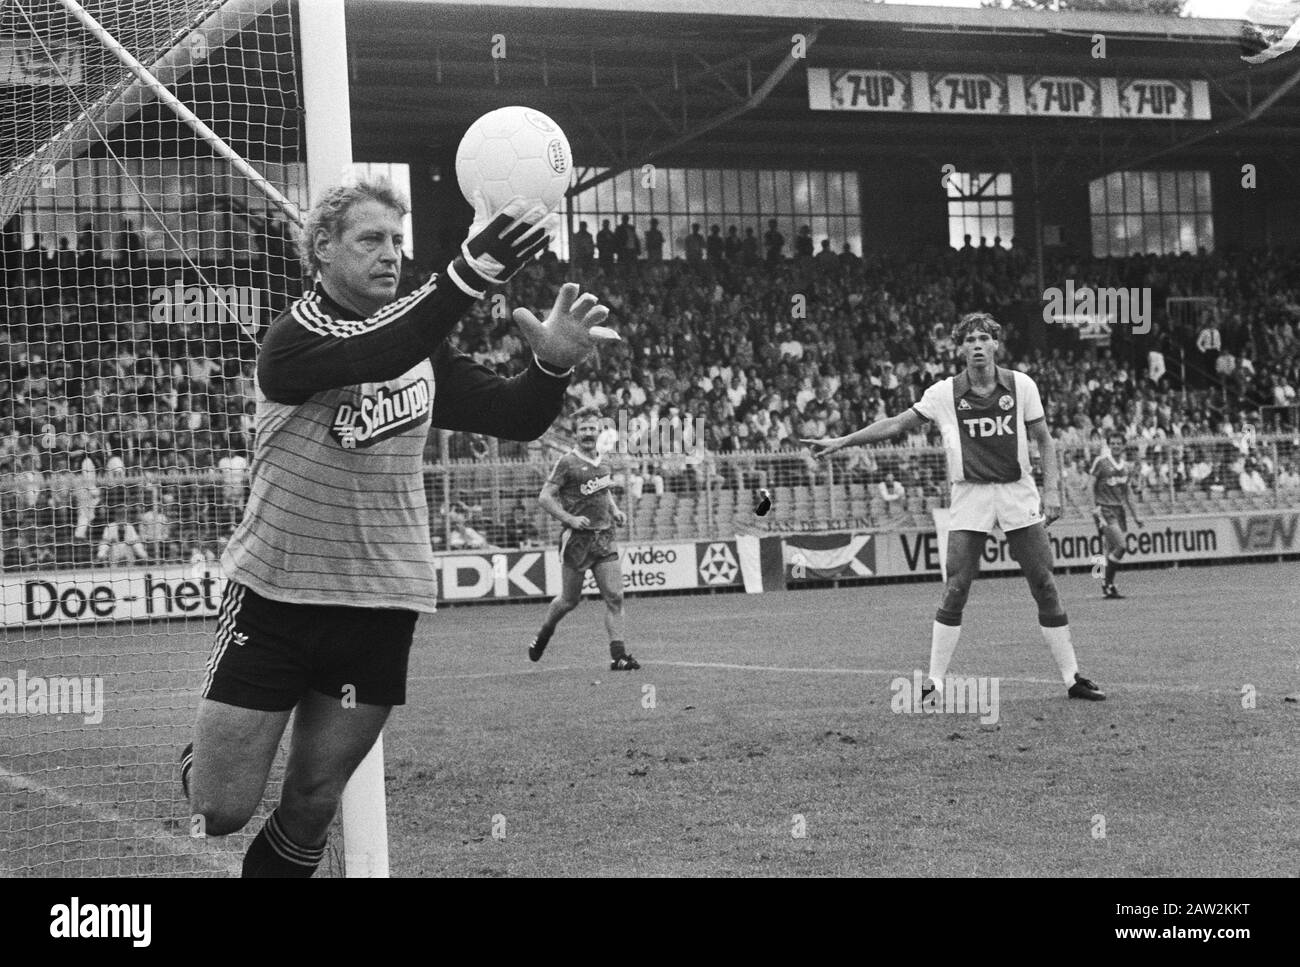 Ajax against PEC Zwolle  Piet Writers keeper PEC Zwolle Annotation: Right Marco van Basten (Ajax). Ajax won 4-2 Date: August 28, 1983 Location: Amsterdam, Noord-Holland Keywords: soccer, sports Person Name: Writers, Piet Institution Name: PEC Zwolle Stock Photo